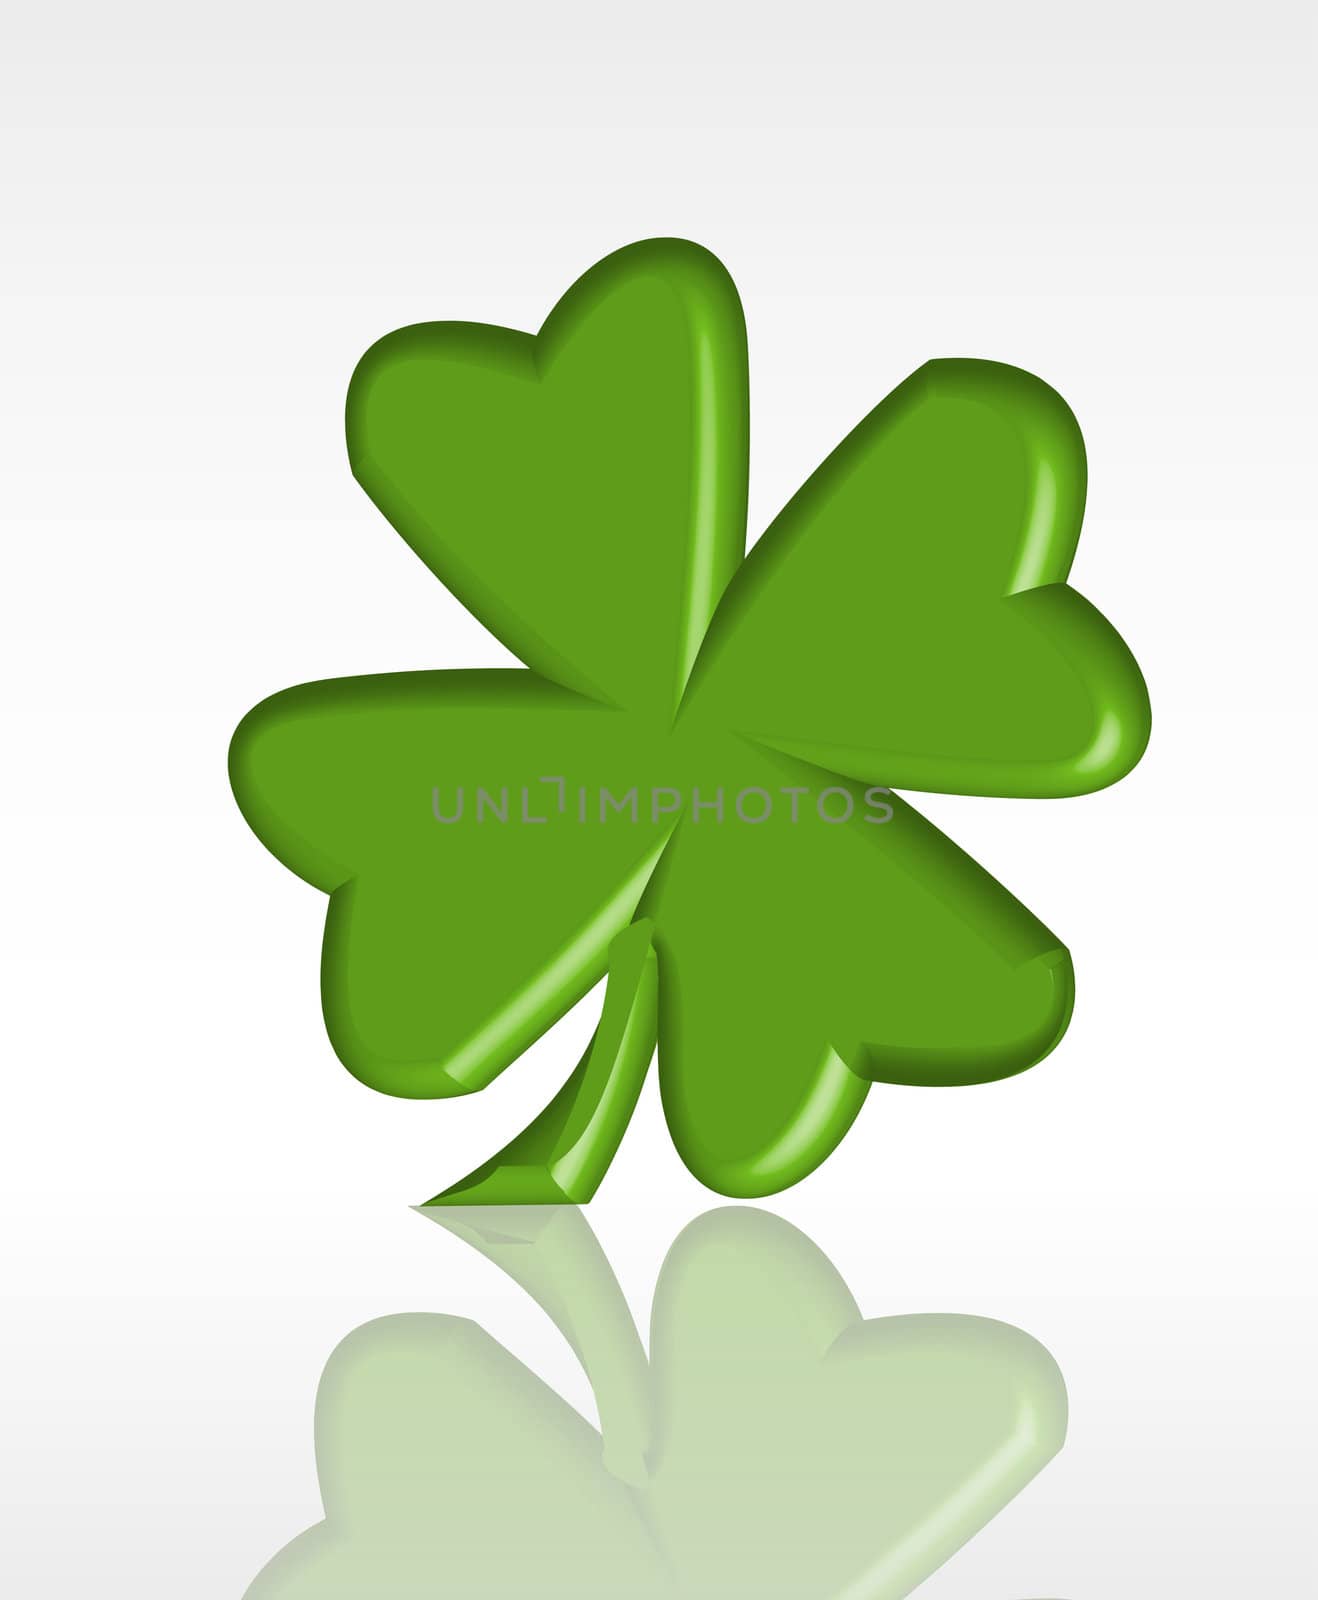 A stylized four-leaf clover. A traditional symbol of luck.